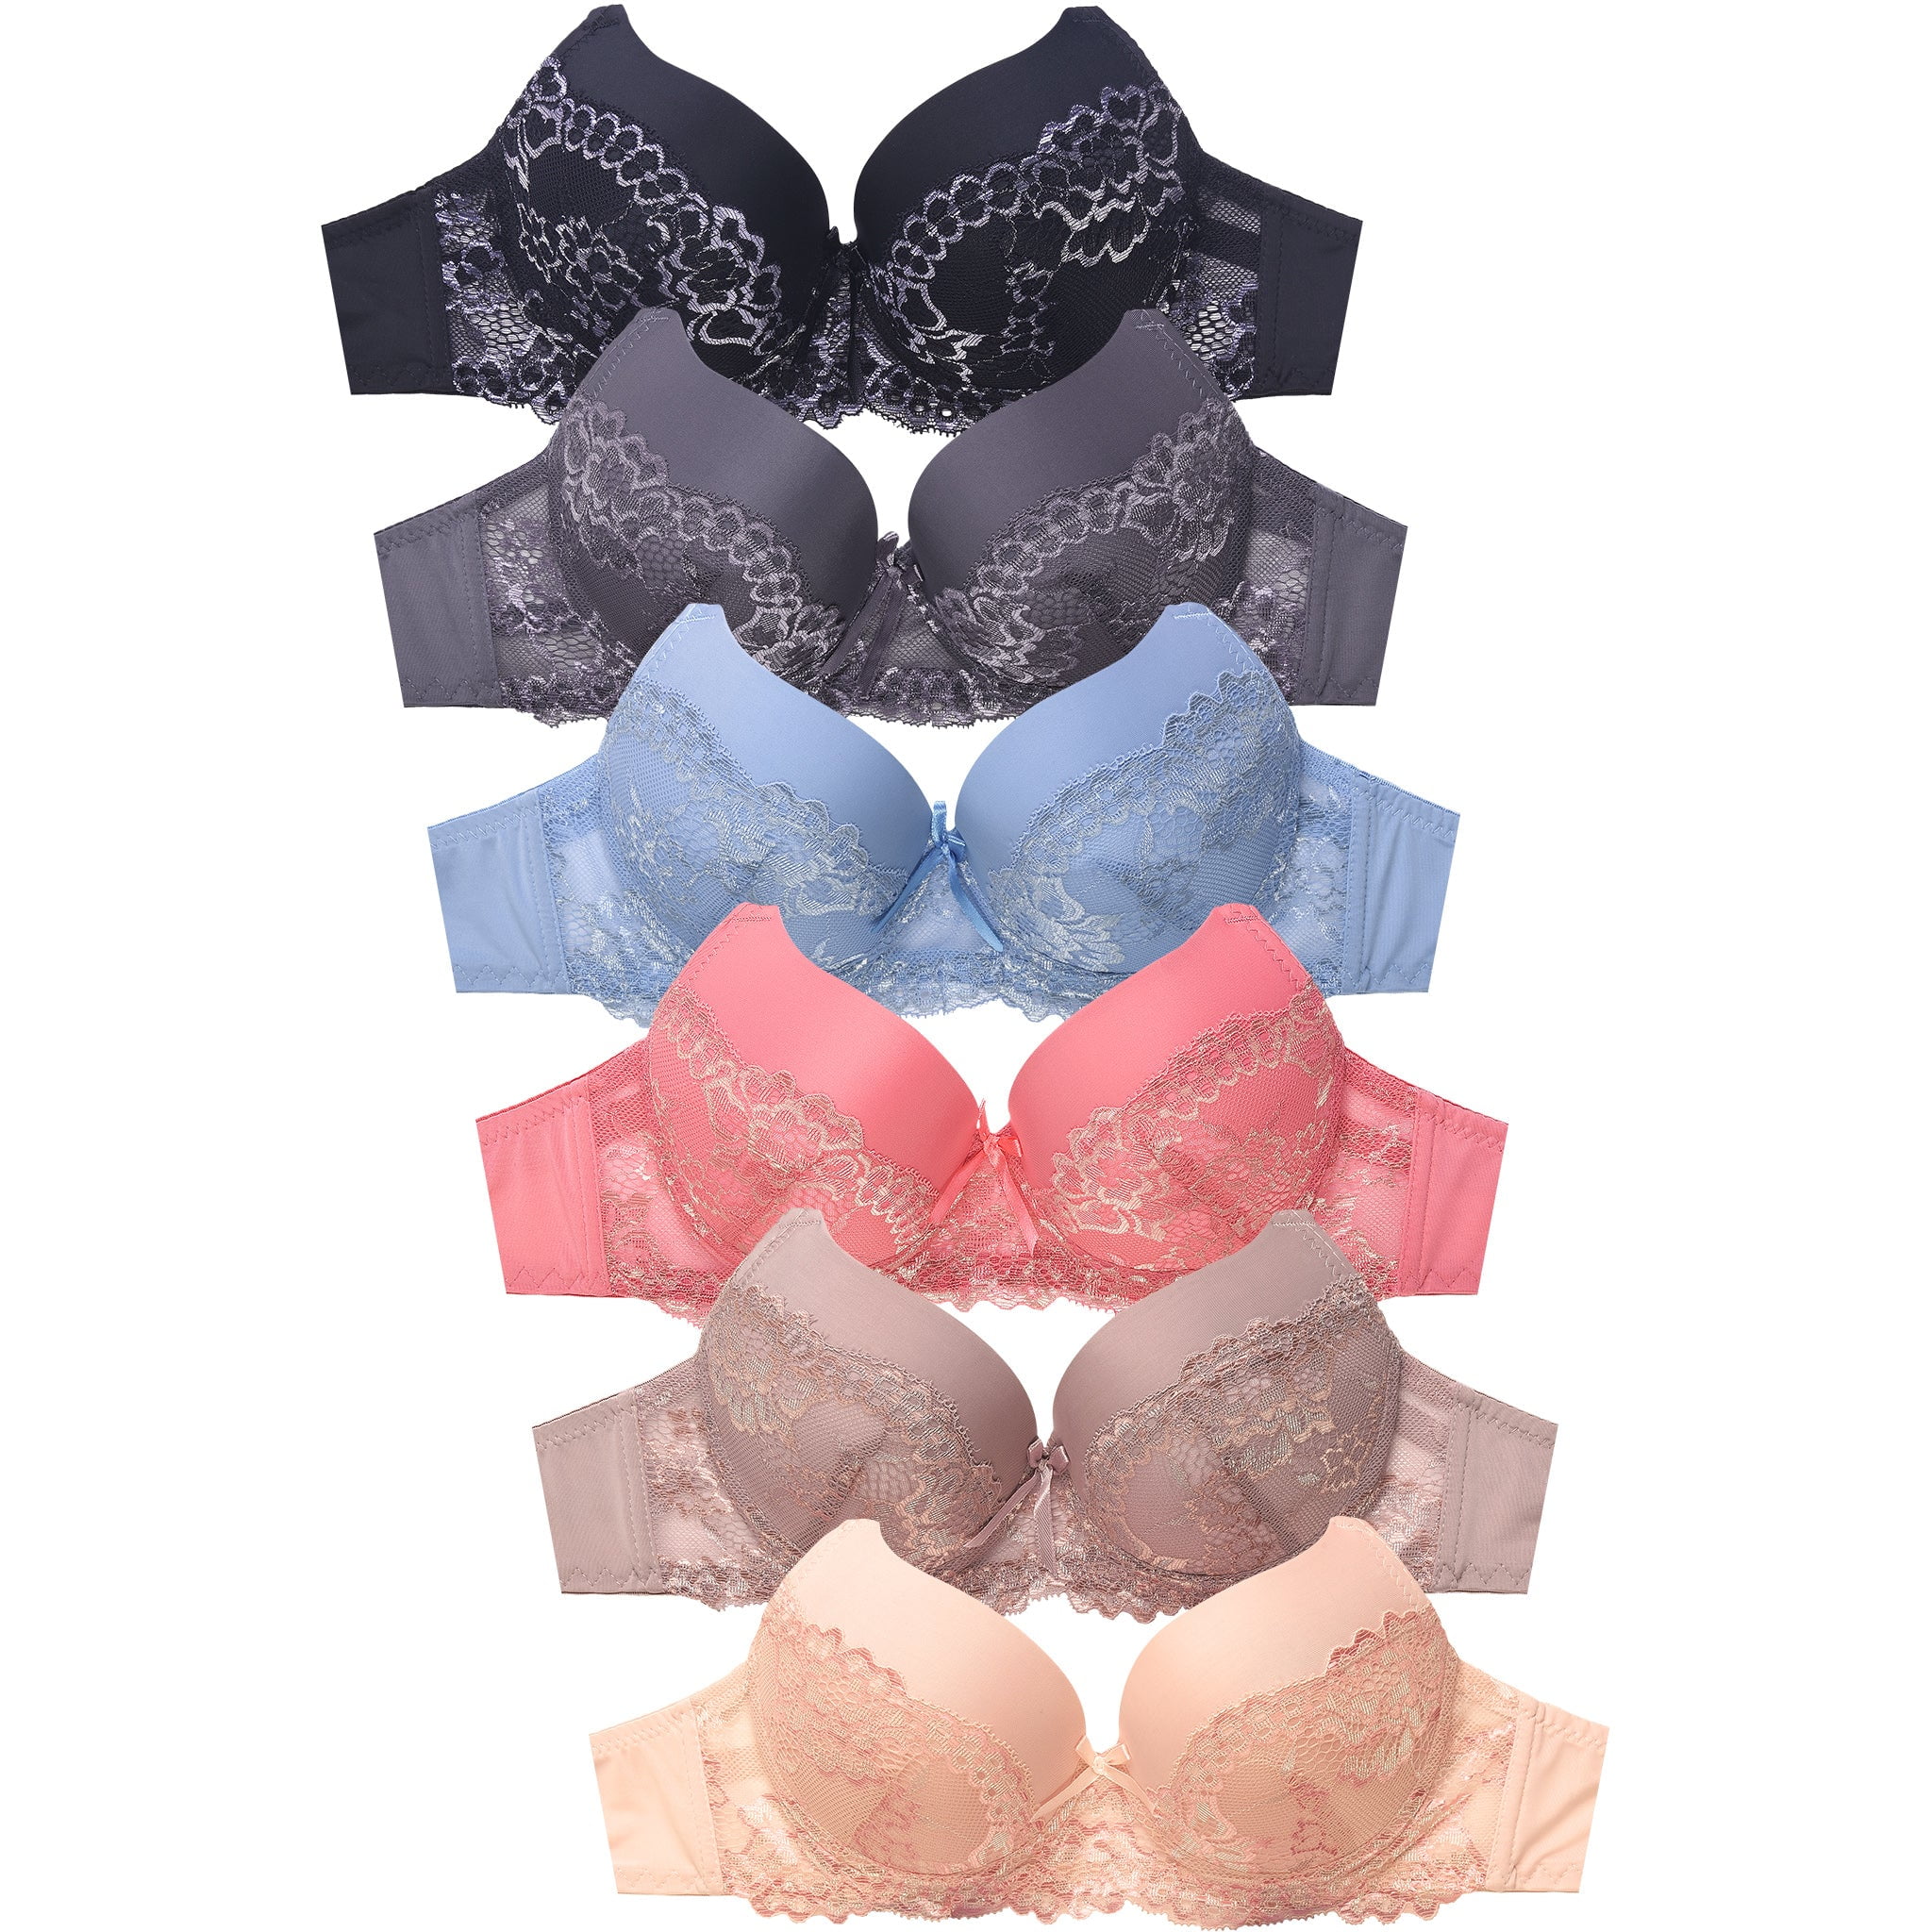 Mamia Women's Basic Plain Lace Bras Pack of 6 - Various Styles Flowery, 34B  